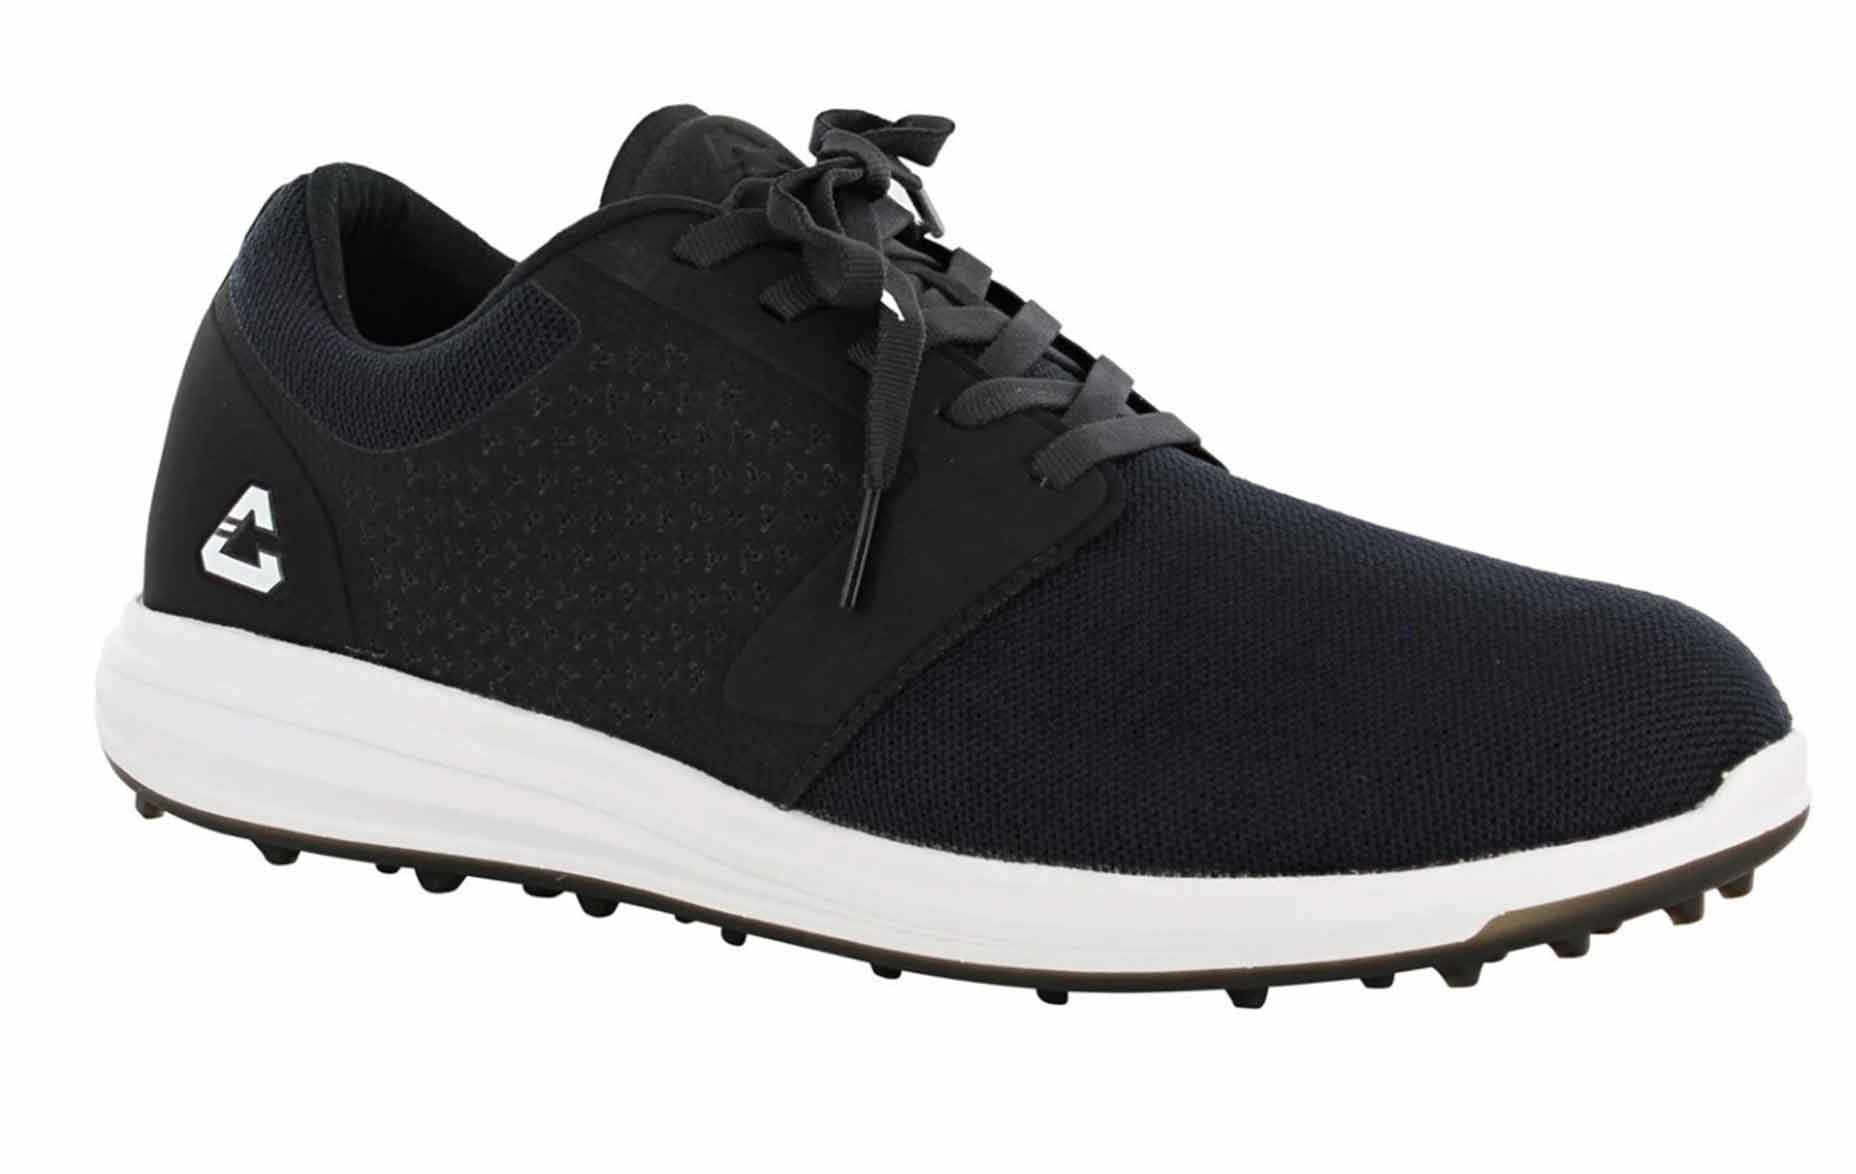 Best golf gifts: 9 comfortable, high-performing golf shoes we recommend